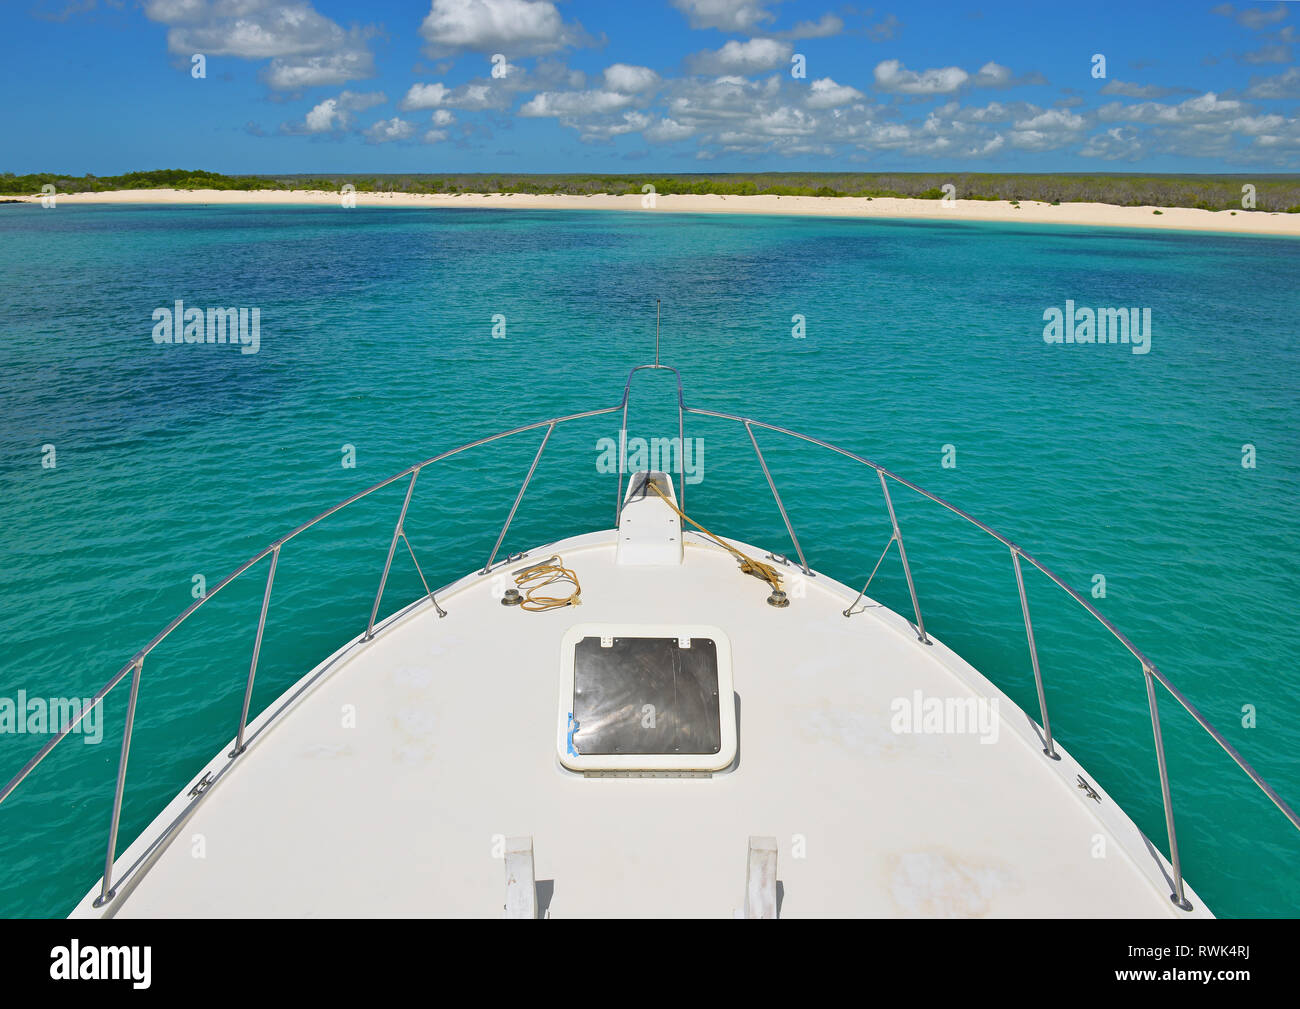 The front of a yacht cruising in the Galapagos islands national park with the beach of South Plaza Island in the background, Pacific Ocean, Ecuador. Stock Photo